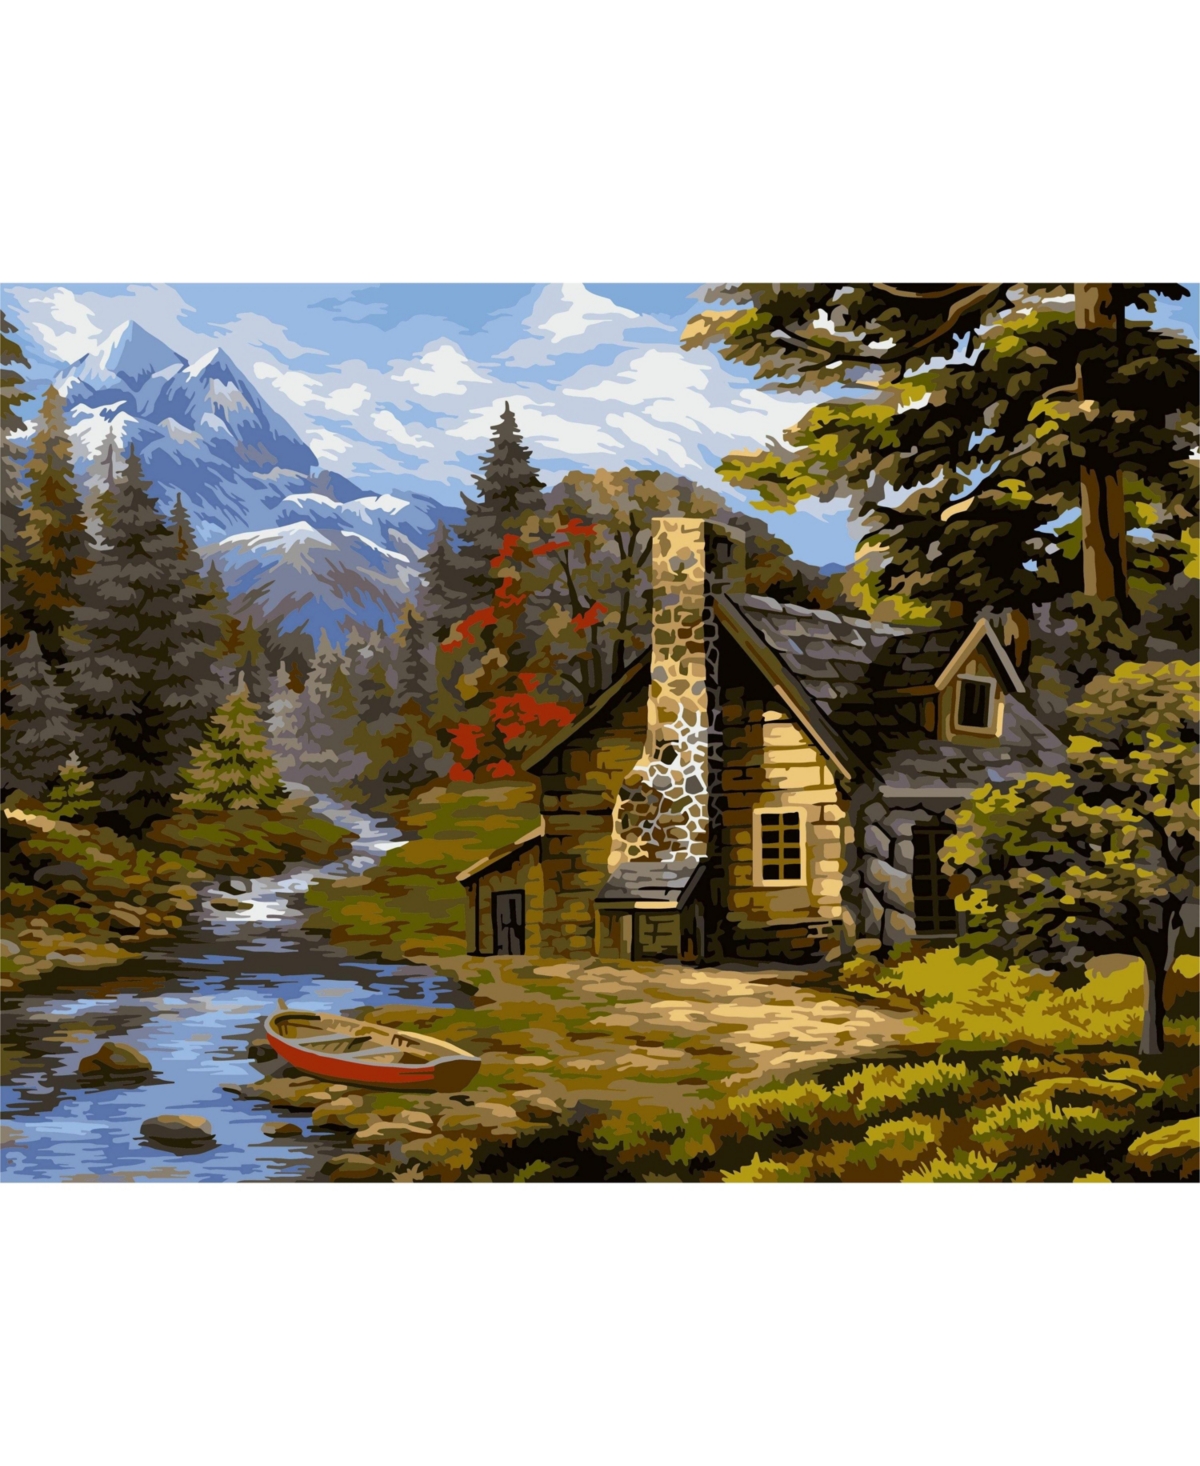 Painting by Numbers Kit Crafting Spark Forest Hut A119 19.69 x 15.75 in